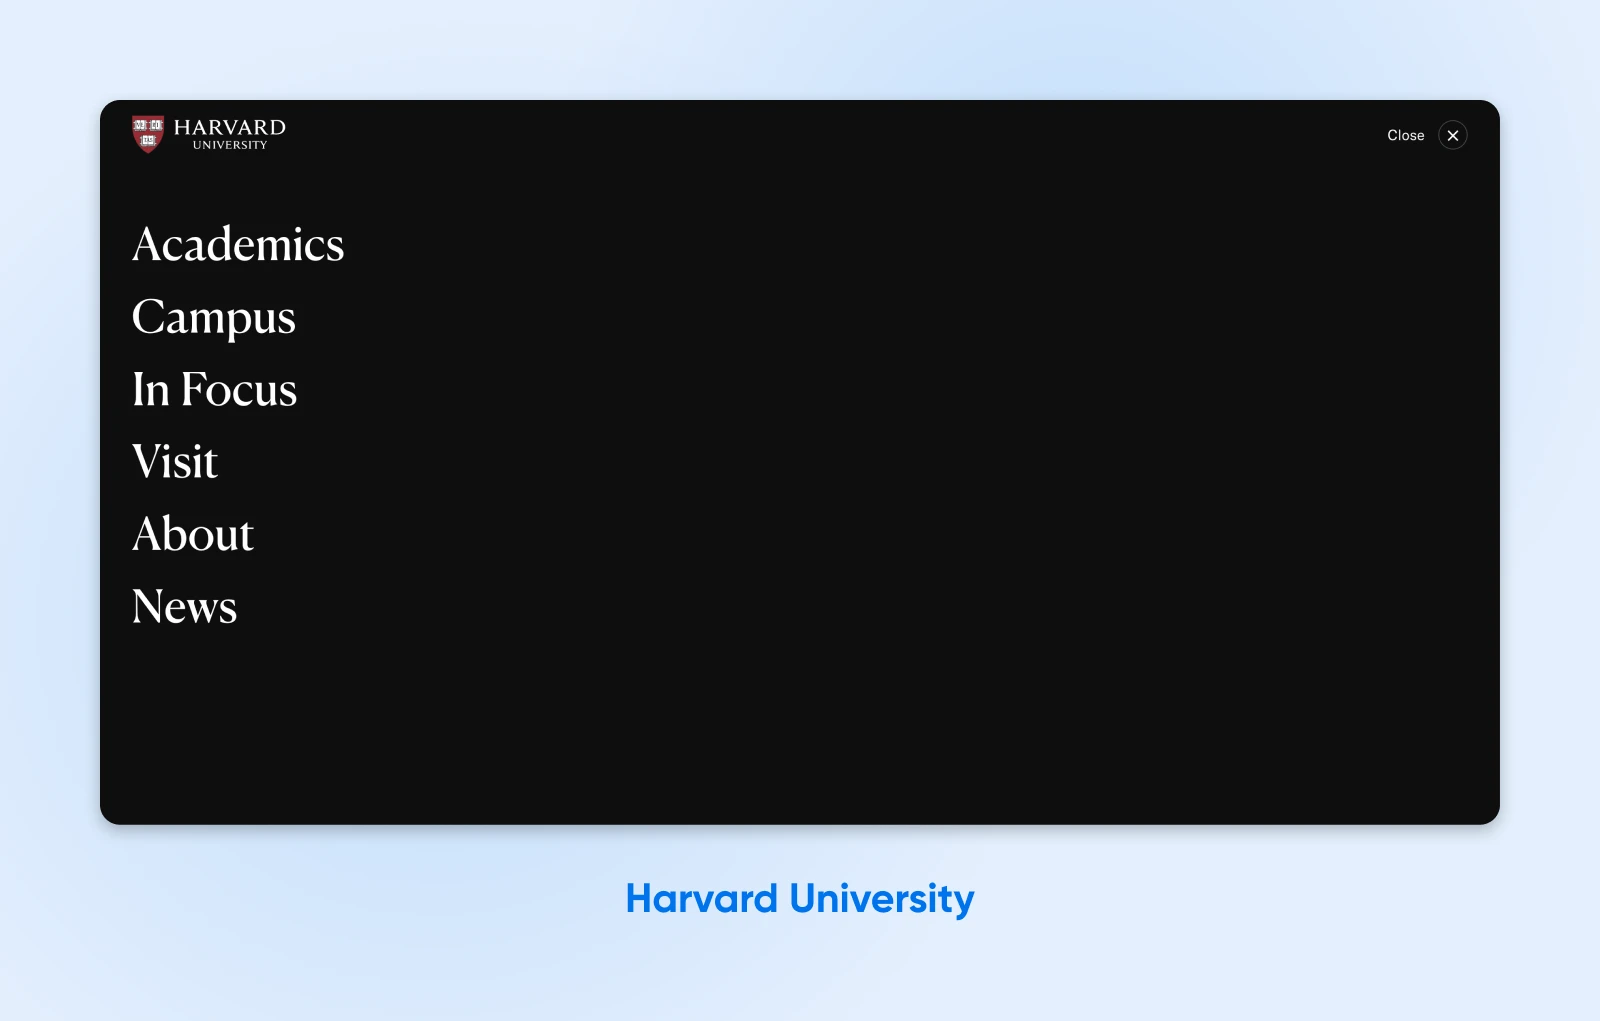 Harvard University's main navigation menu with tabs for About and Academics in large, white text against a black background, 